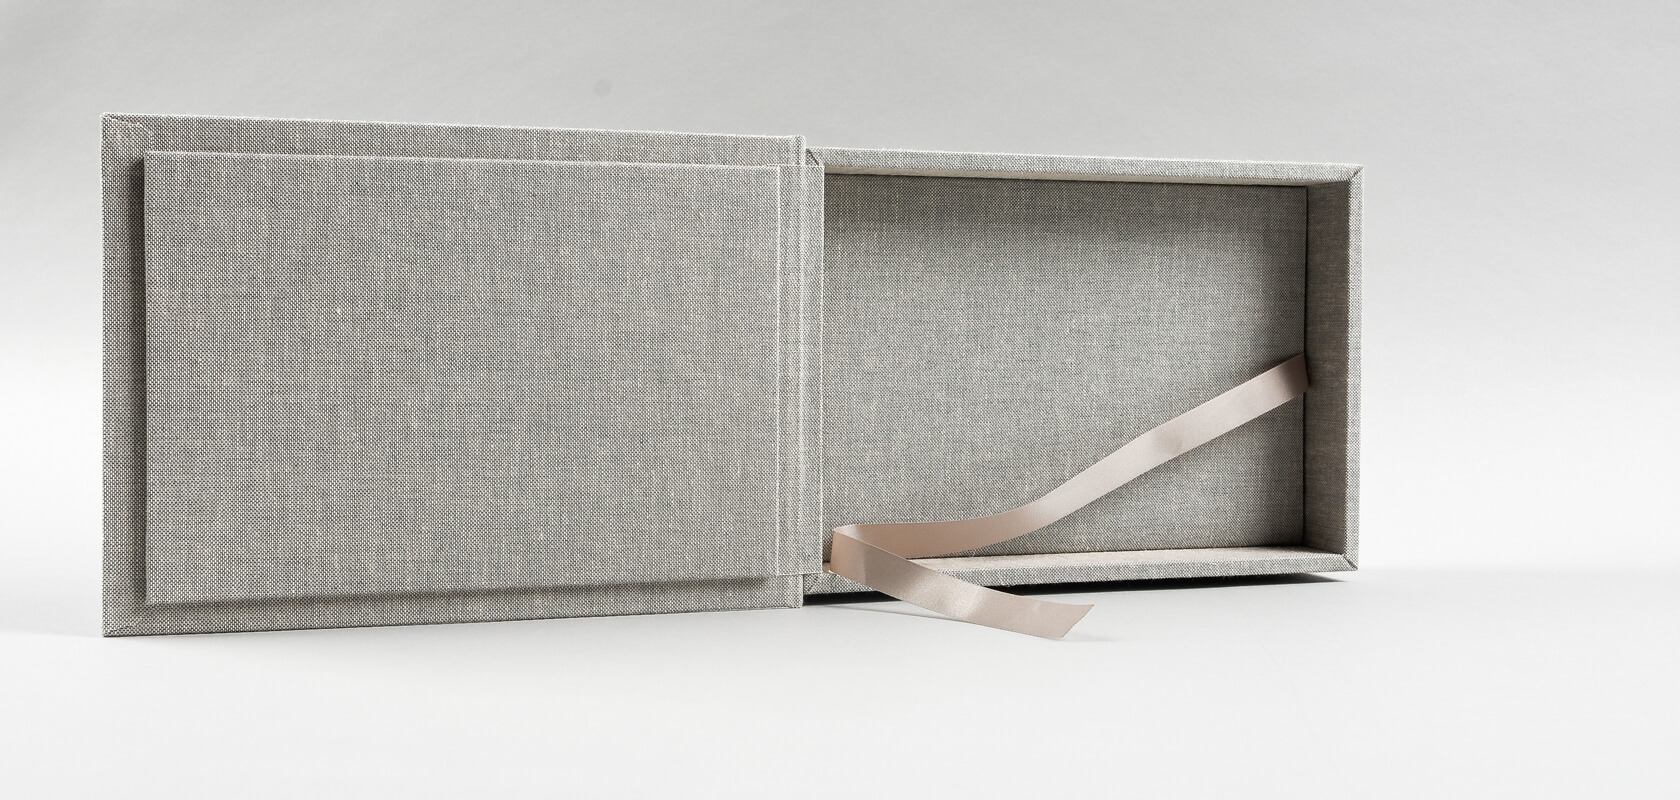 Handcrafted and finished both inside and outside in an elegant, gray canvas in the shade of Ashen.